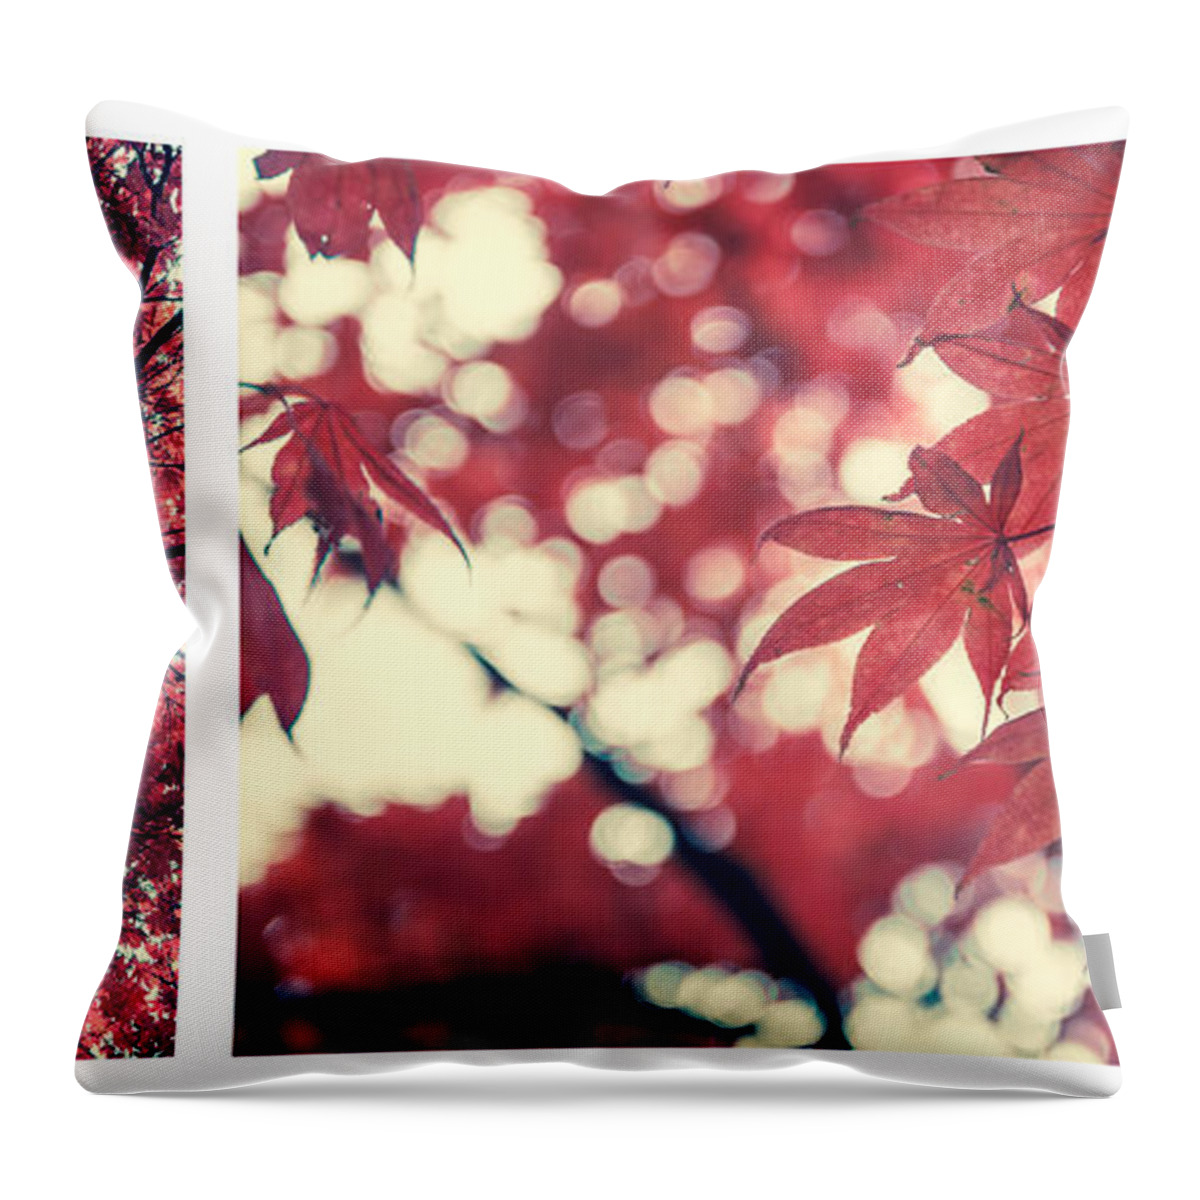 Autumn Throw Pillow featuring the photograph Japanese Maple Collage by Hannes Cmarits